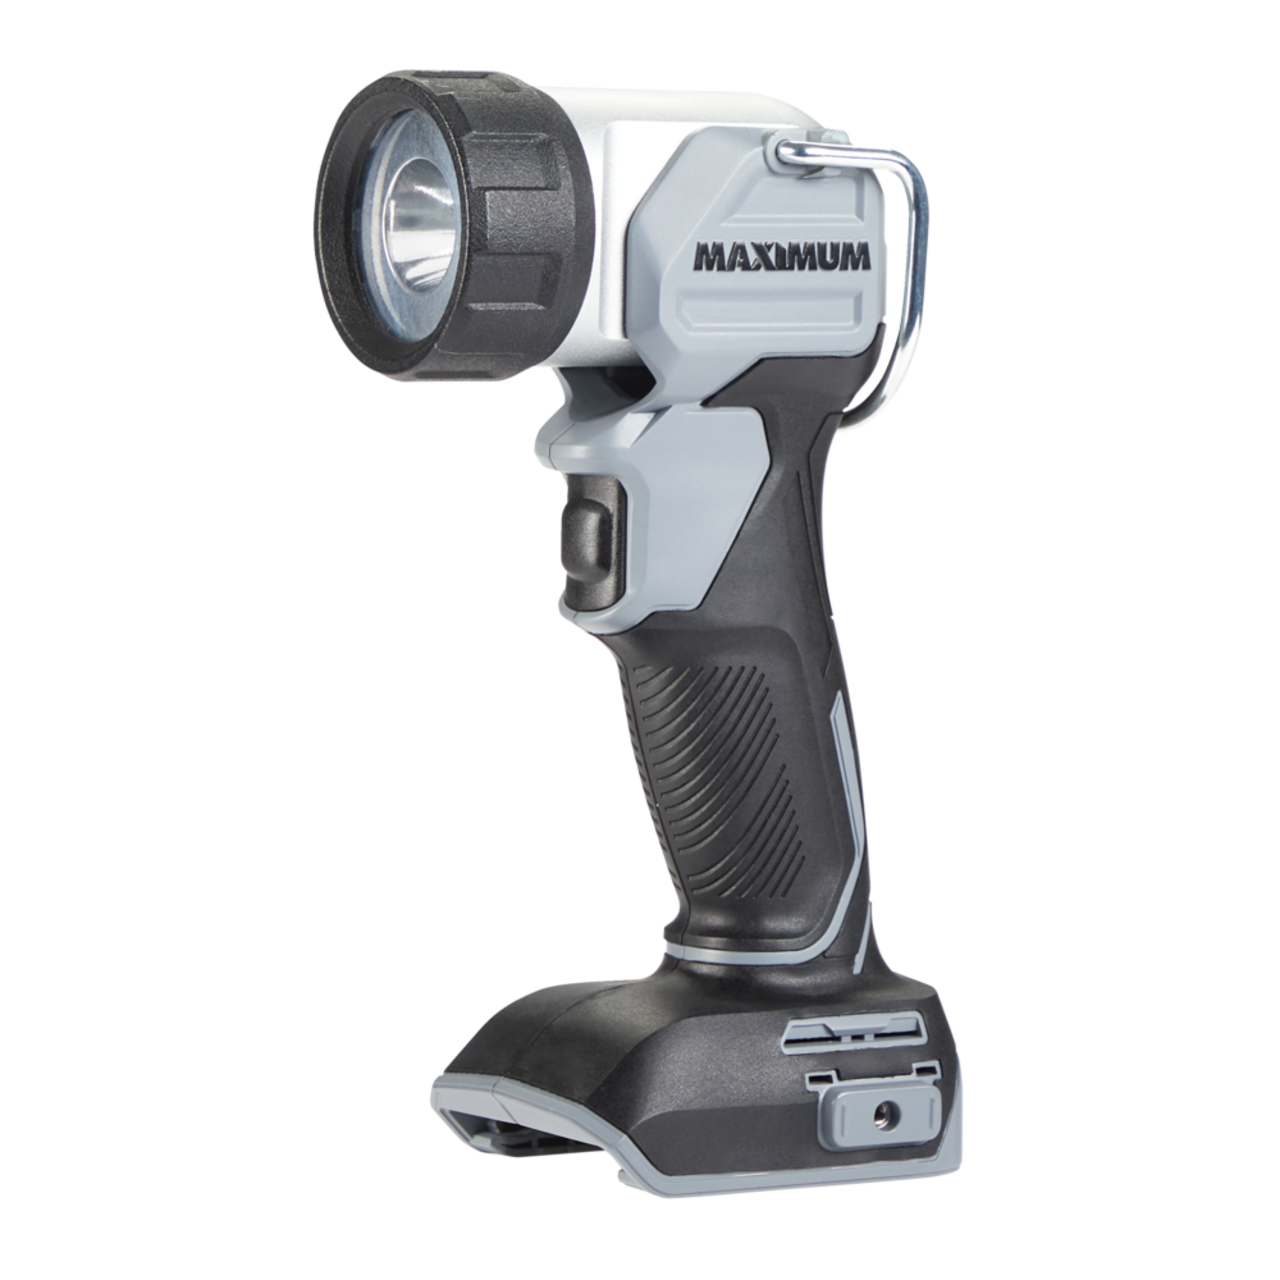 MAXIMUM 20V Work Light, Tool Only | Canadian Tire